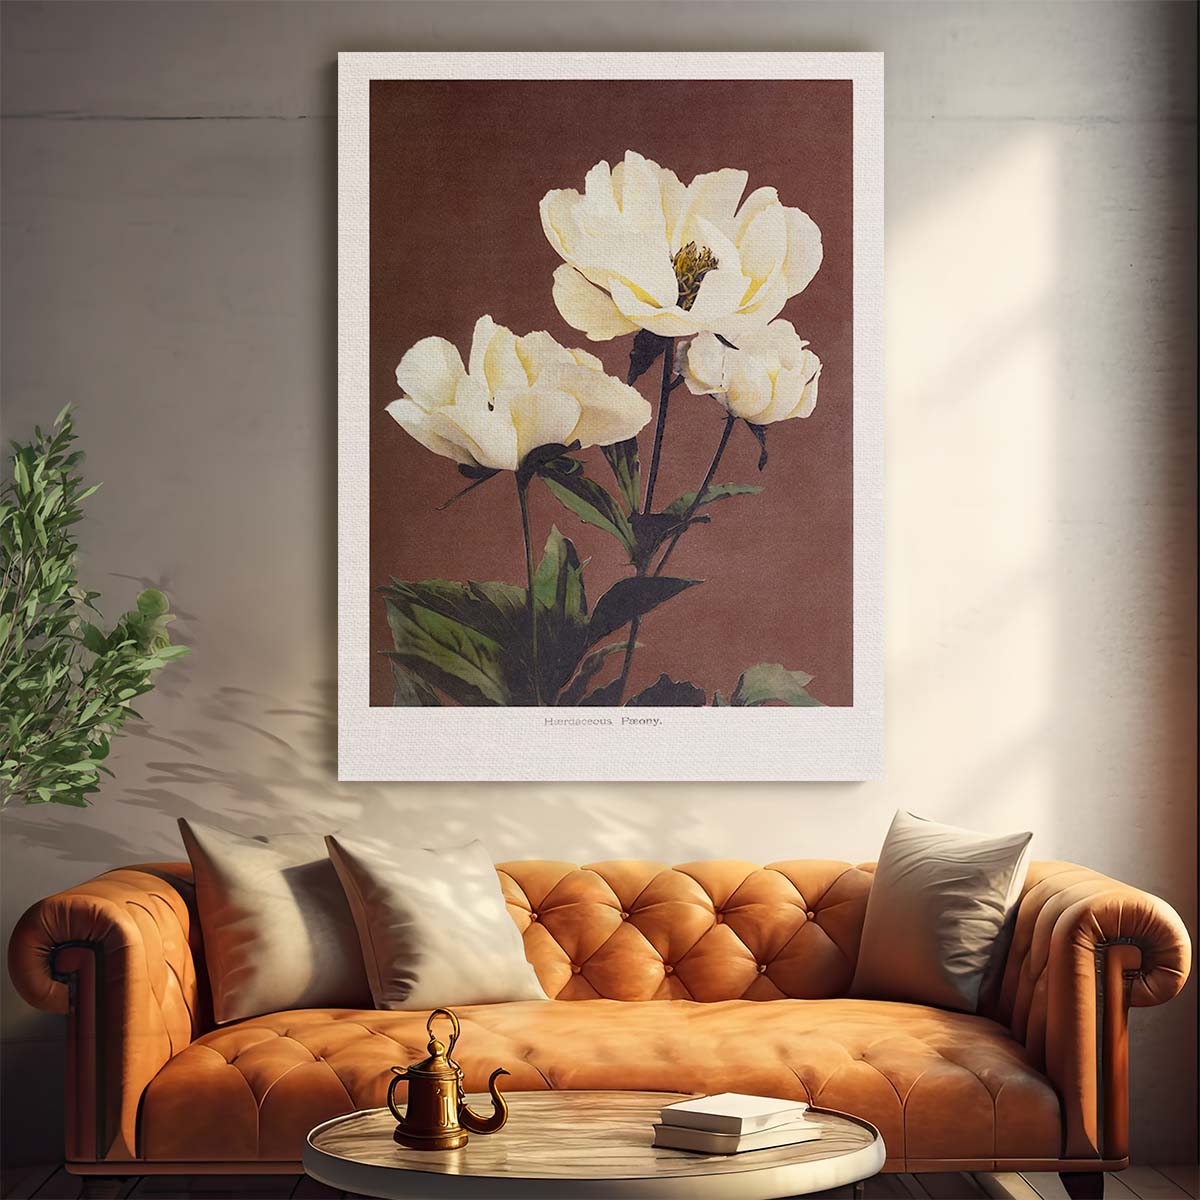 Vintage Japanese Peony Illustration Wall Art by Ohara Koson by Luxuriance Designs, made in USA